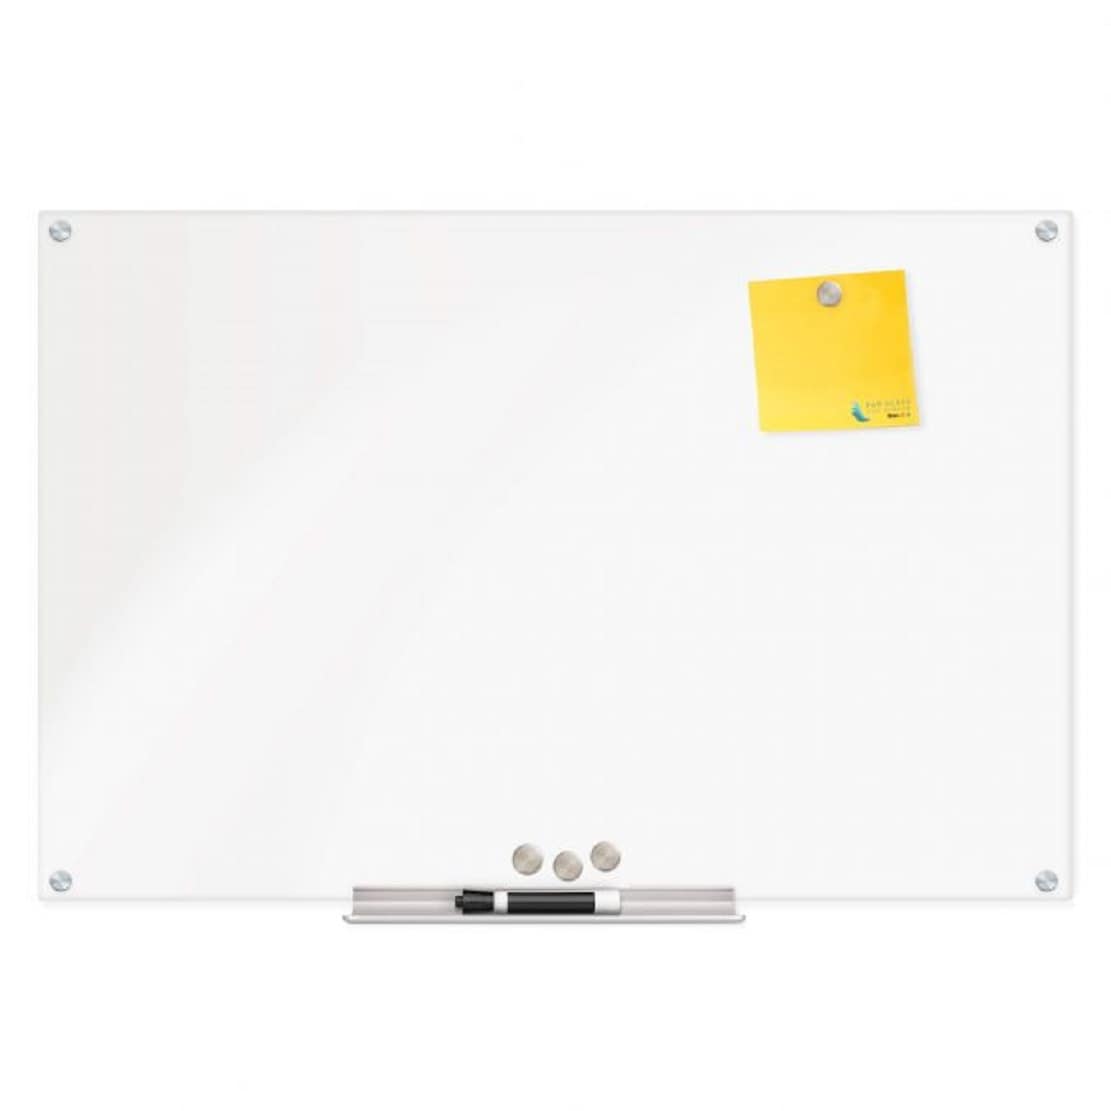 Large Magnetic Whiteboard Sticker for Wall, Self-Adhesive Back with Dry  Erase Board Surface, Includes 4 Markers 4 Magnets, 48 x 36 Inches